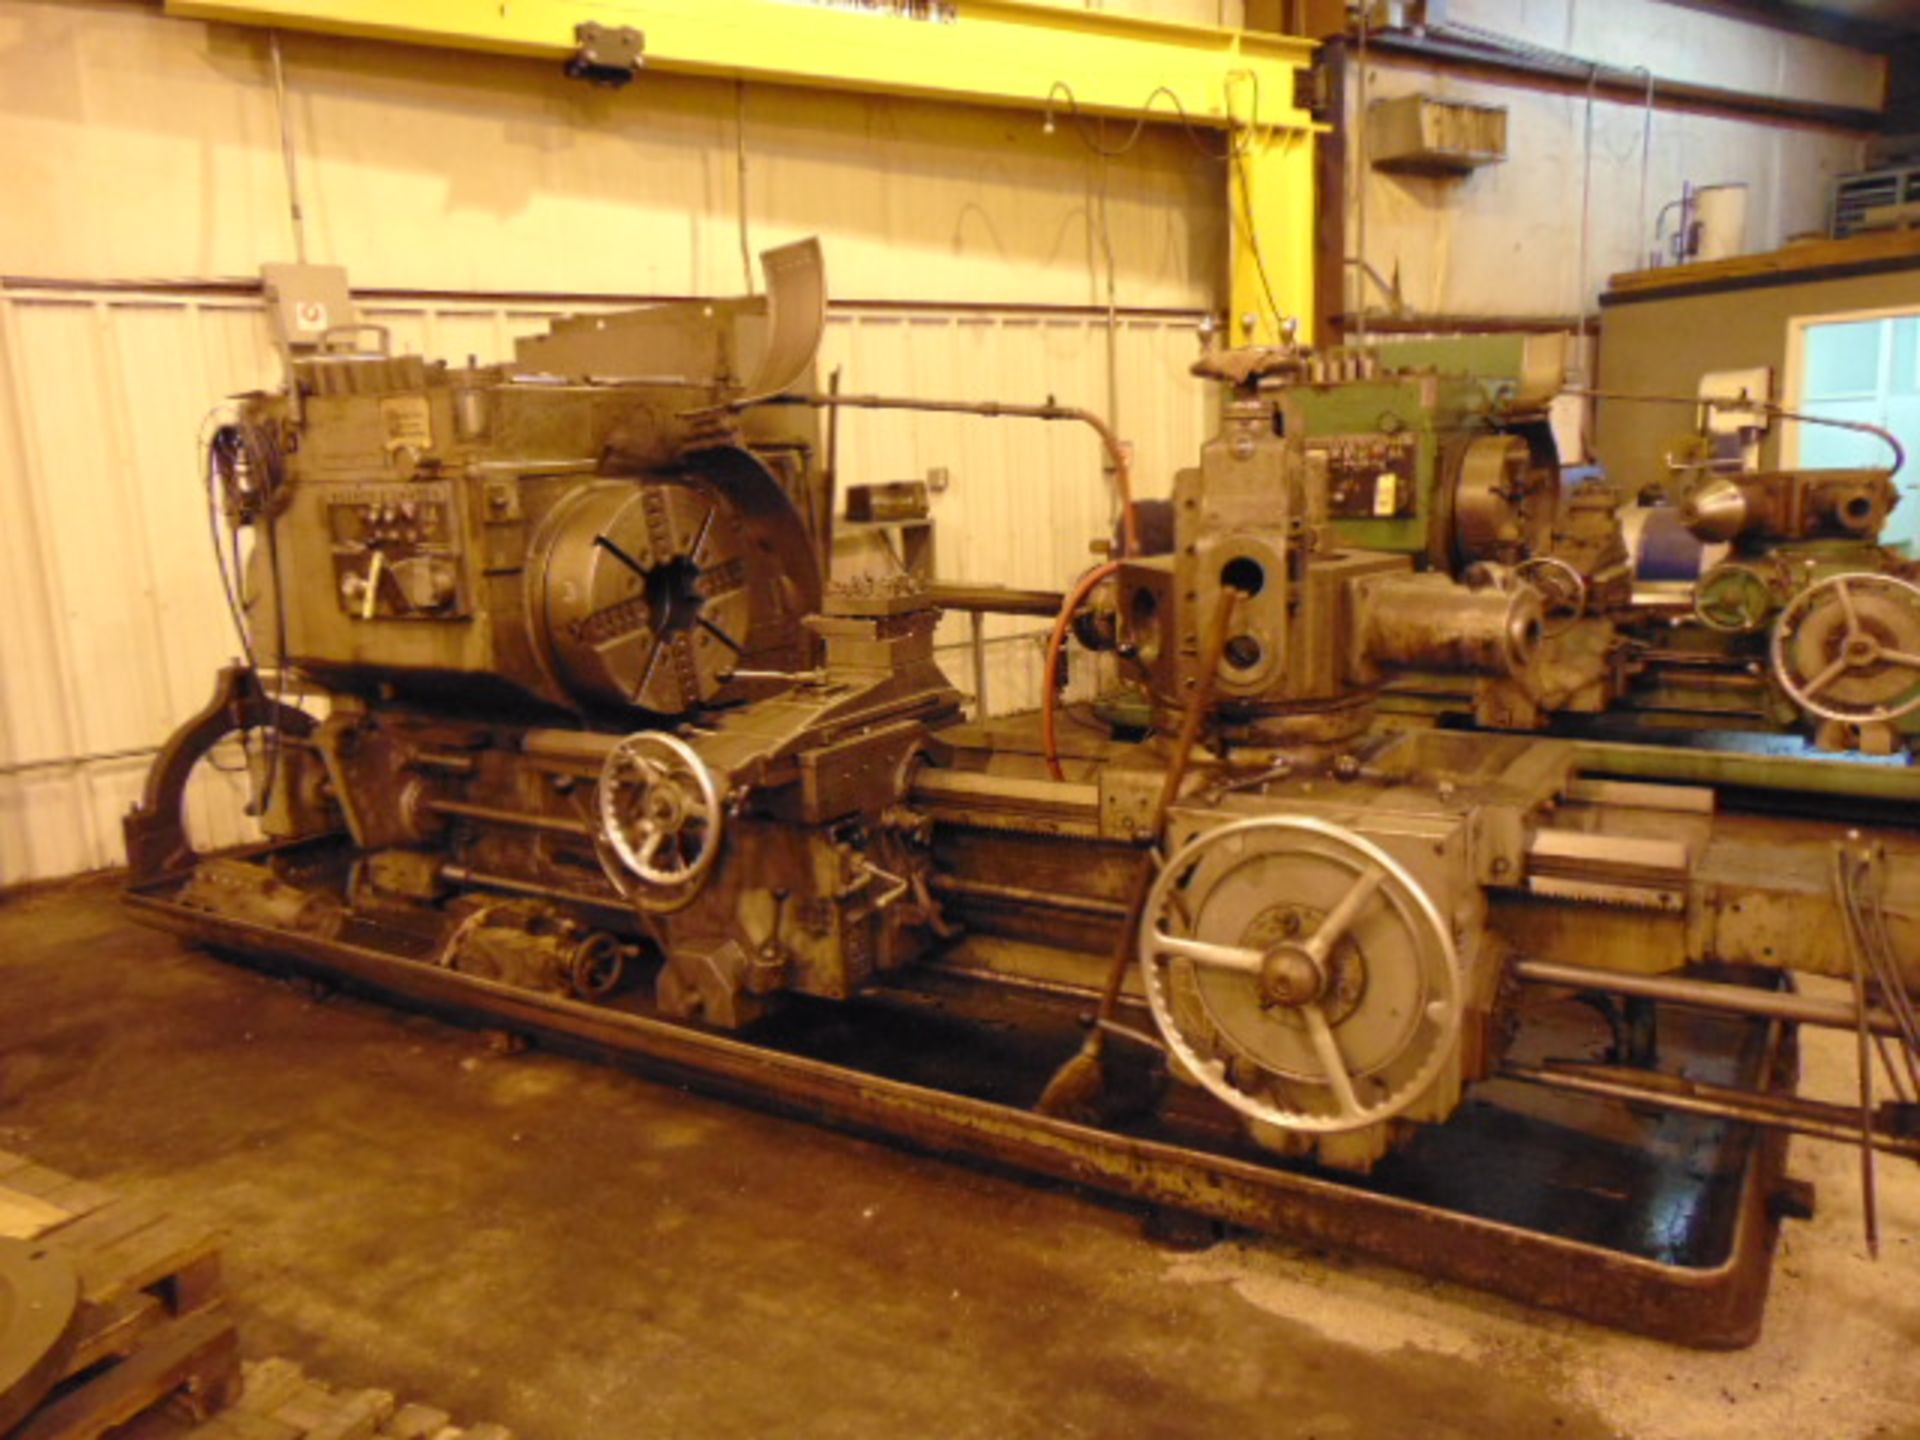 TURRET LATHE, WARNER & SWASEY MDL. 4A, M-3550, 9-1/2" spdl. bore, 6 pos. turret, fixed turret, 24"